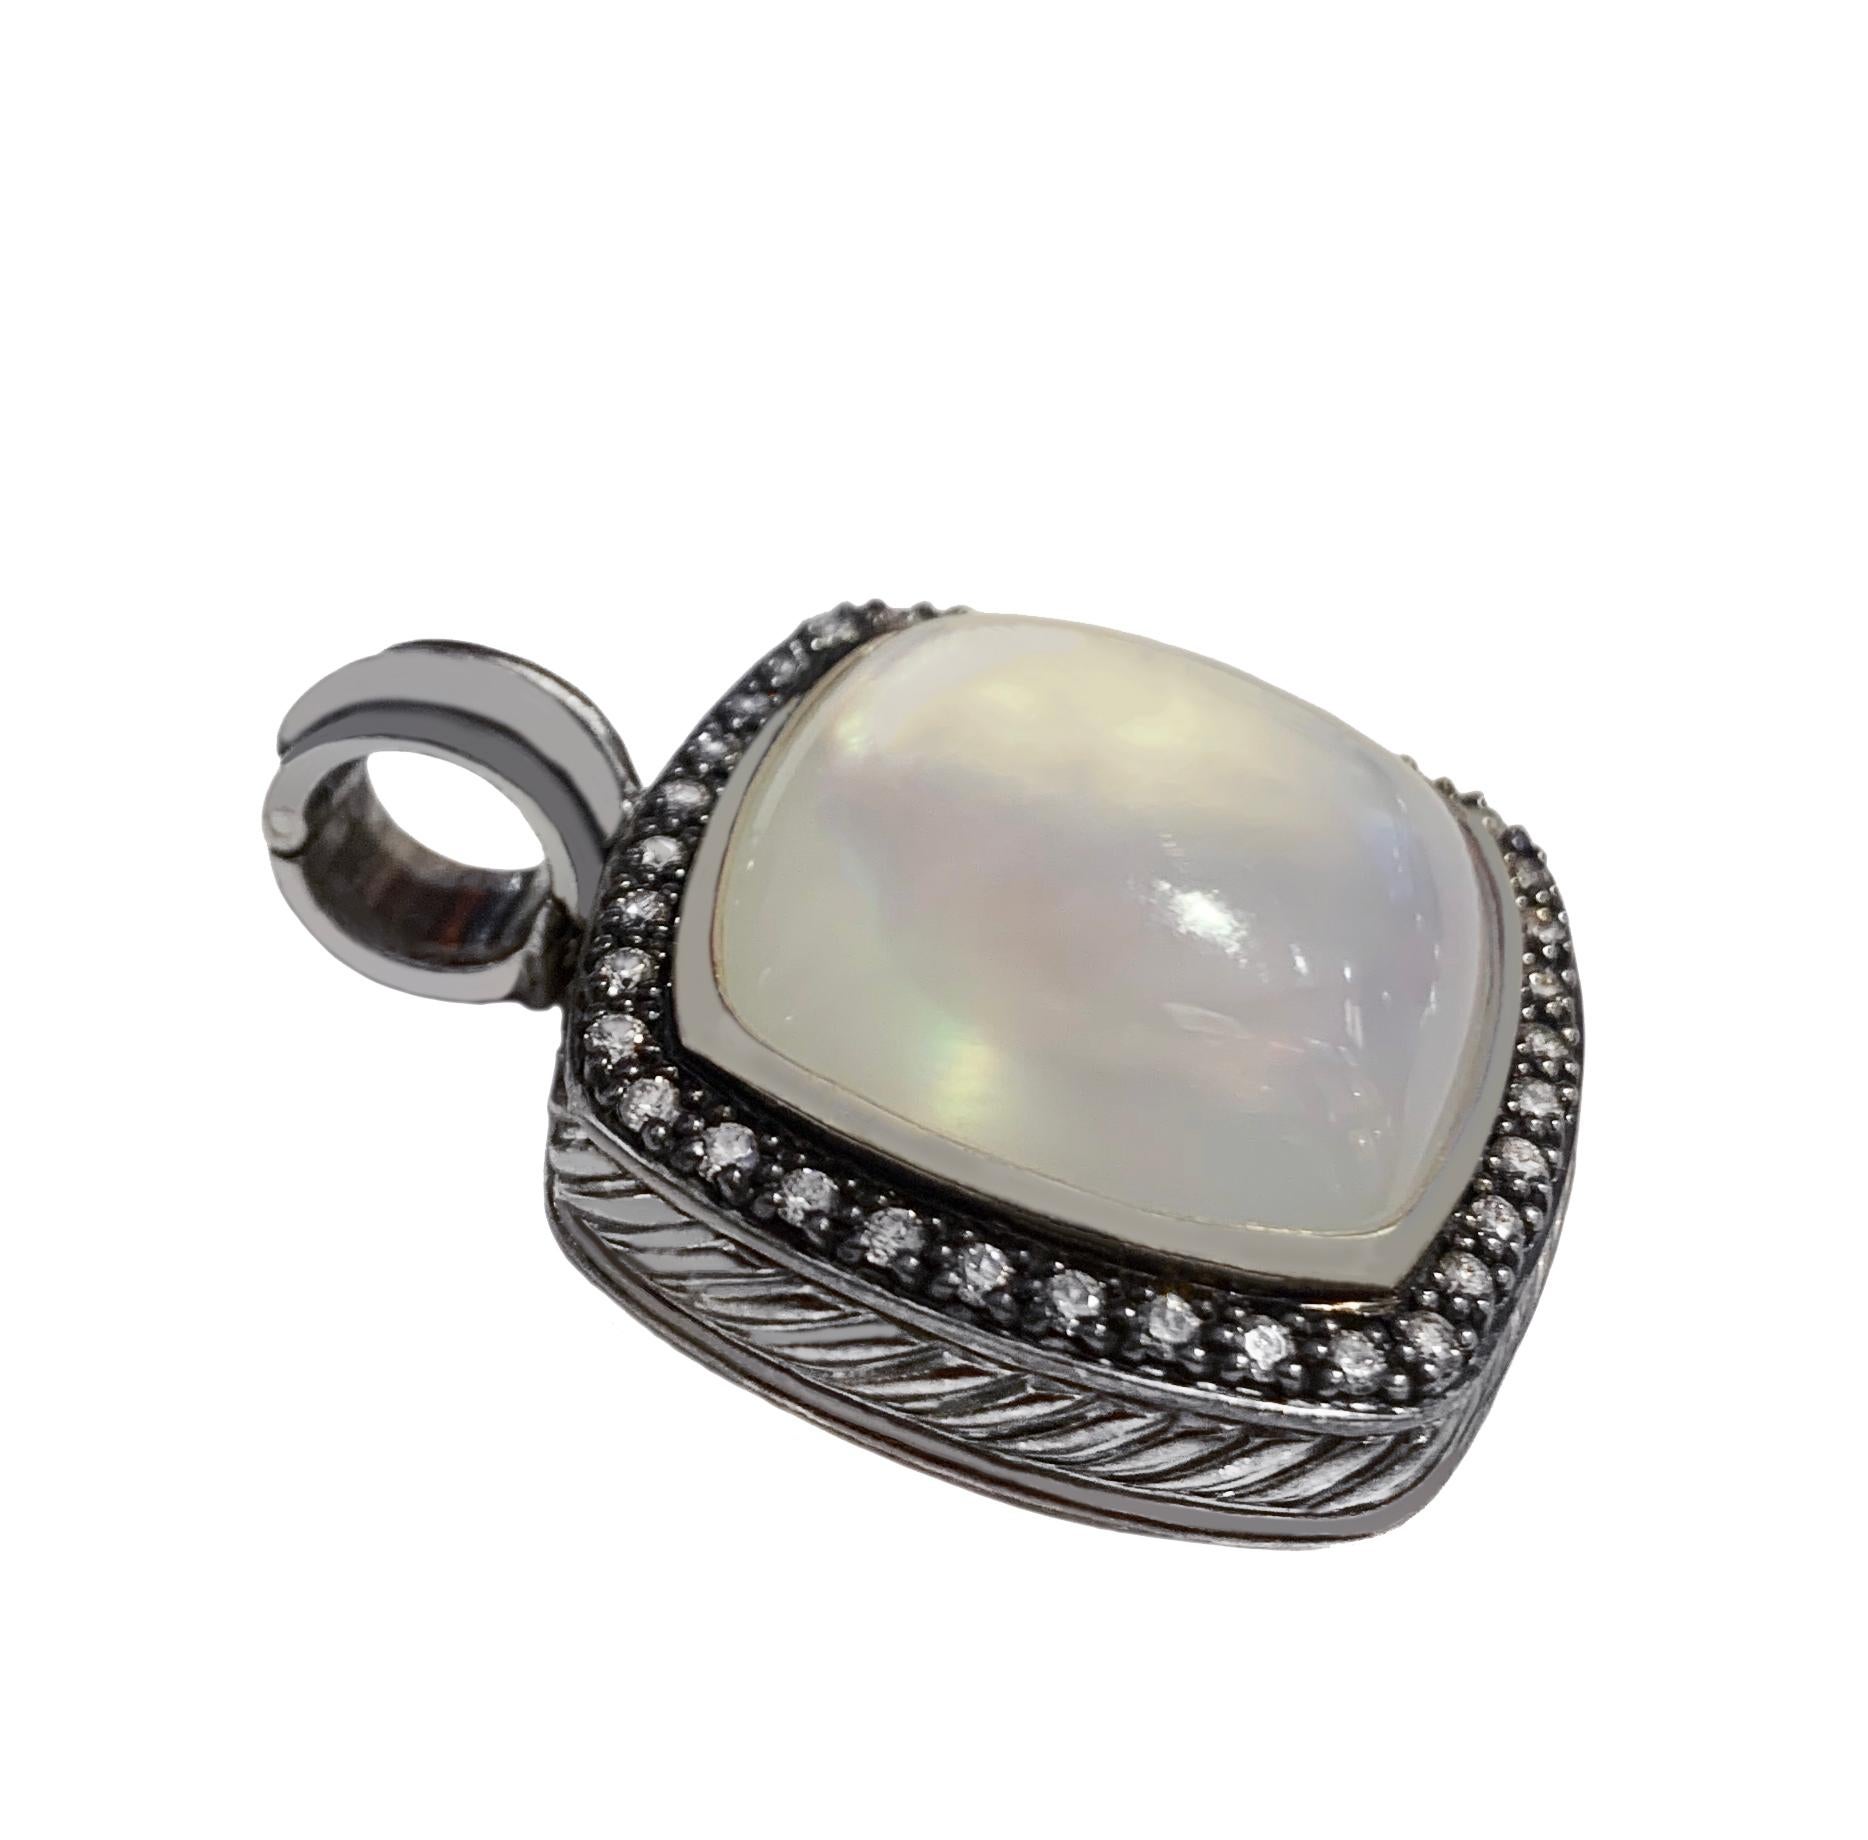 -Mint condition
-Sterling Silver 925
- Moonstone 19x19mm
-Pendant dimension: 27x27mm
-Comes with David Yurman pouch